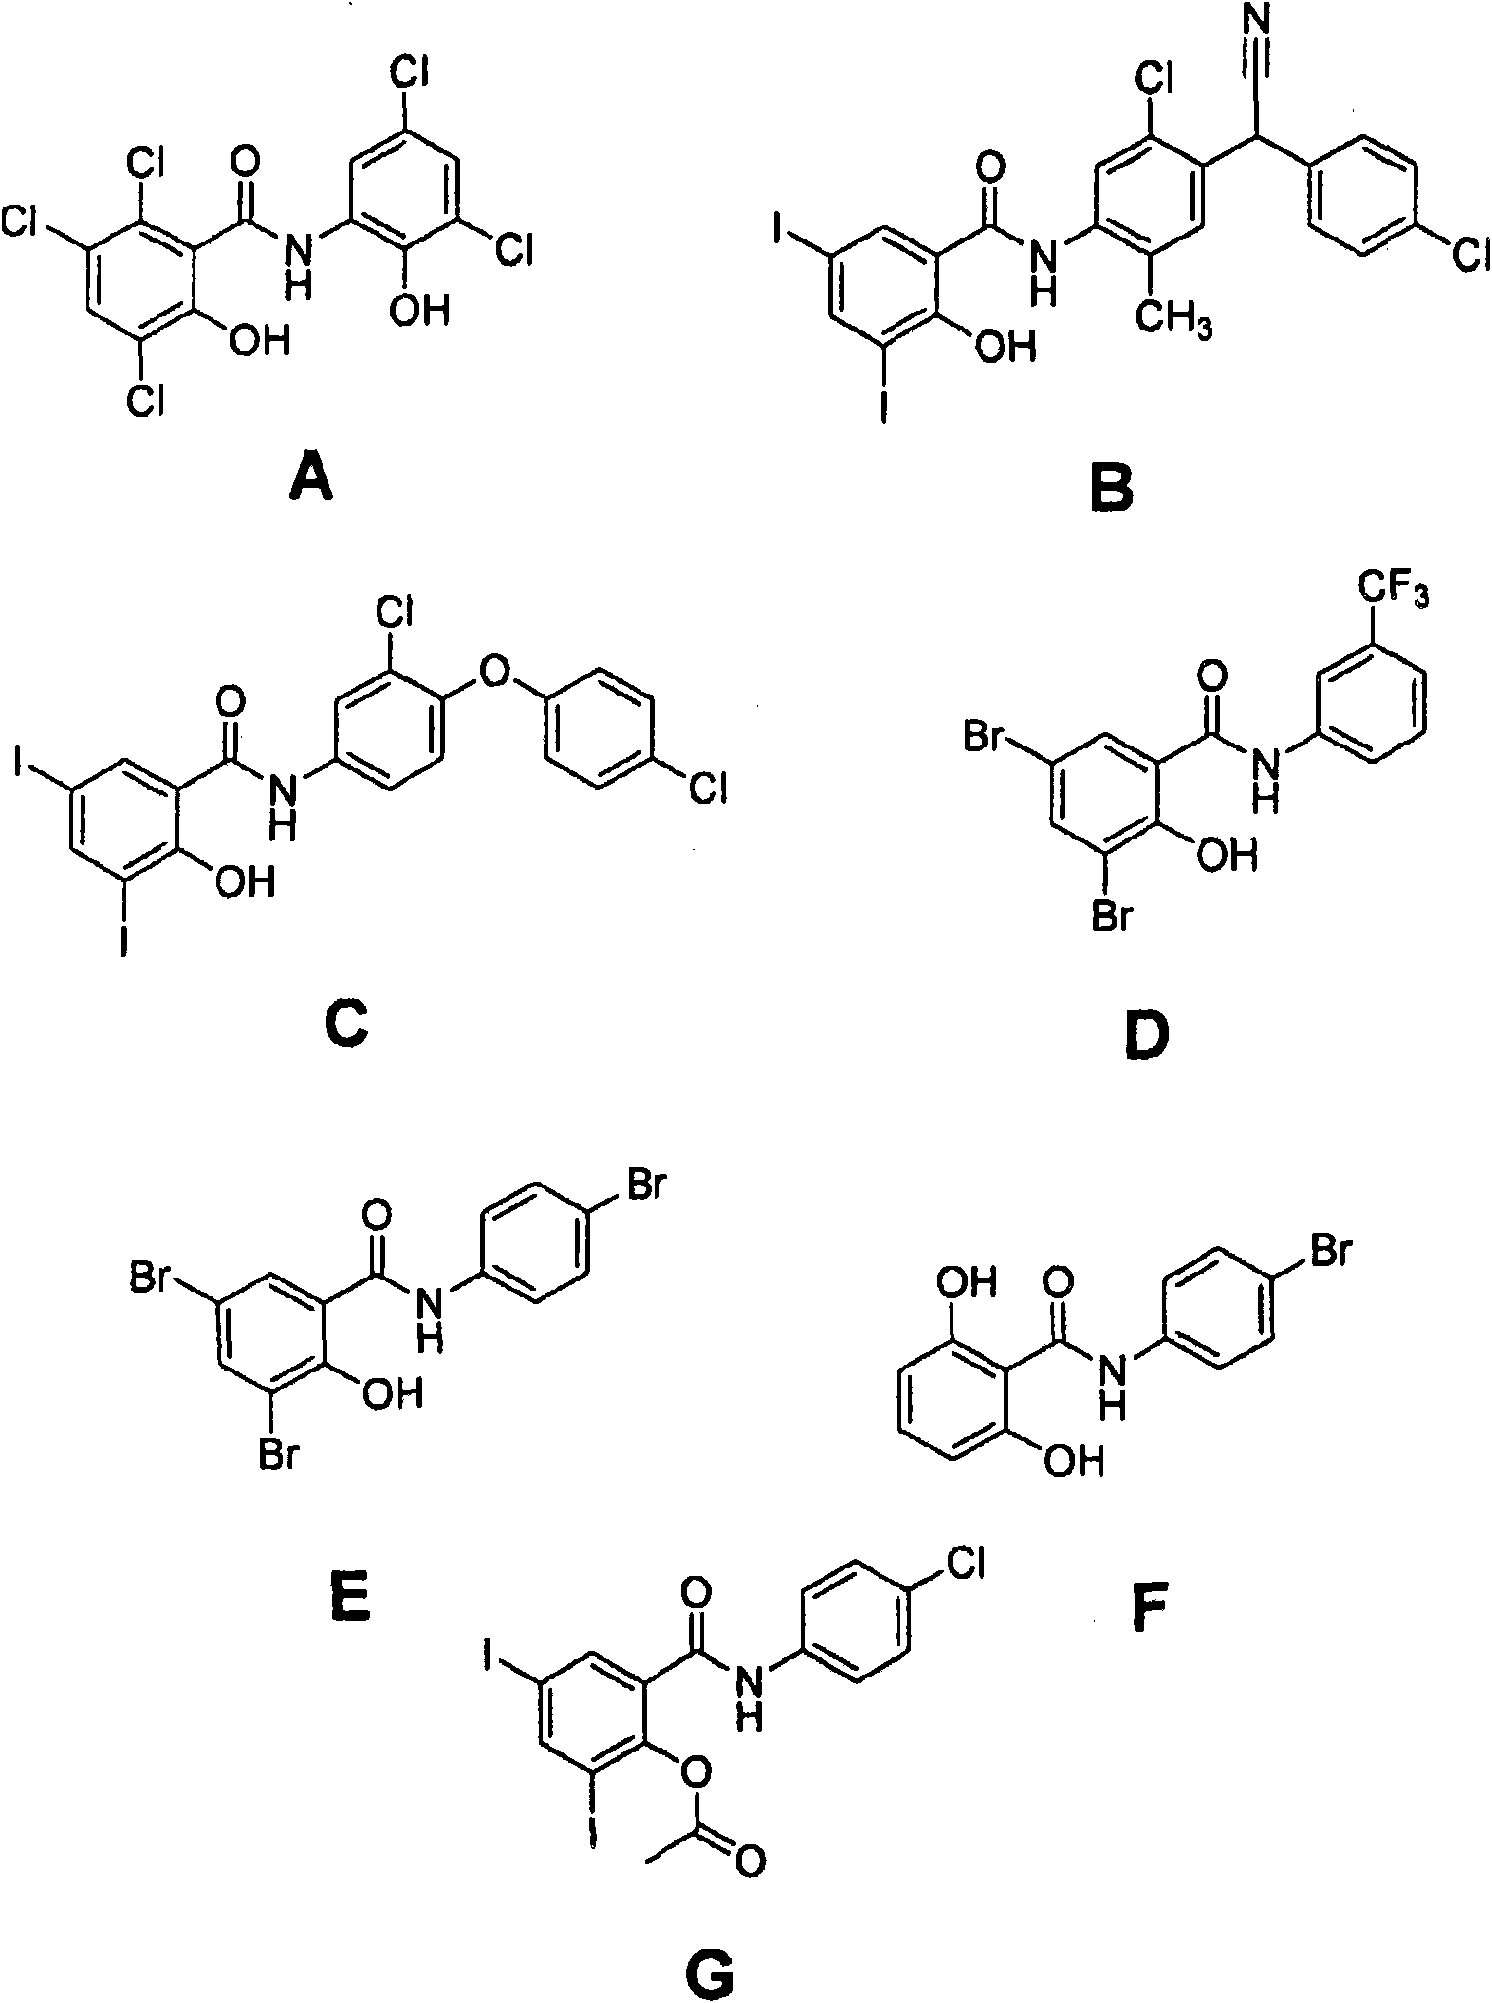 Salicylanilide modified peptides for use as oral therapeutics